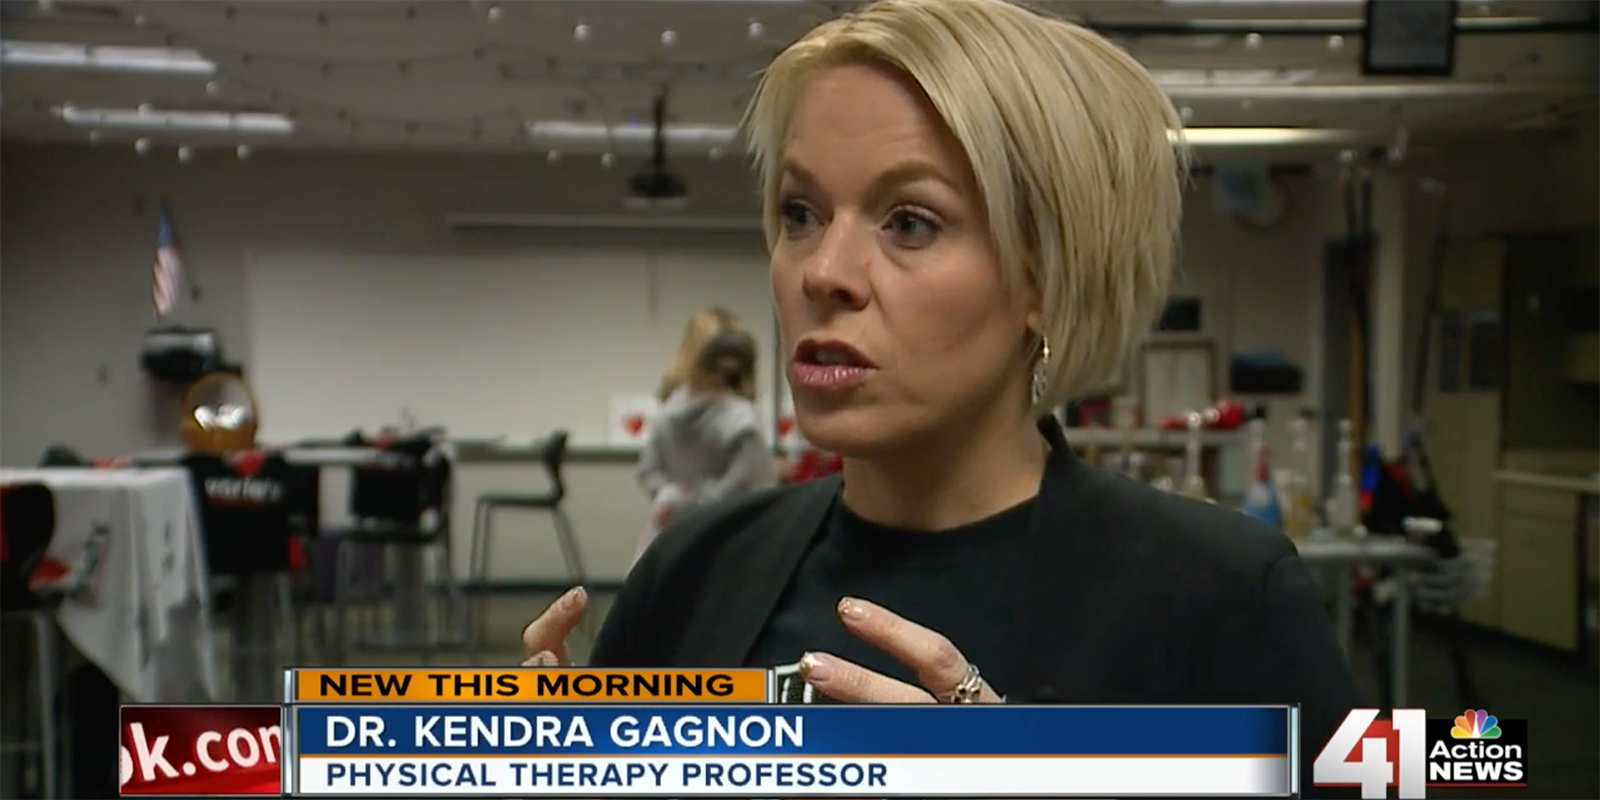 Dr. Kendra Gagnon in a TV interview